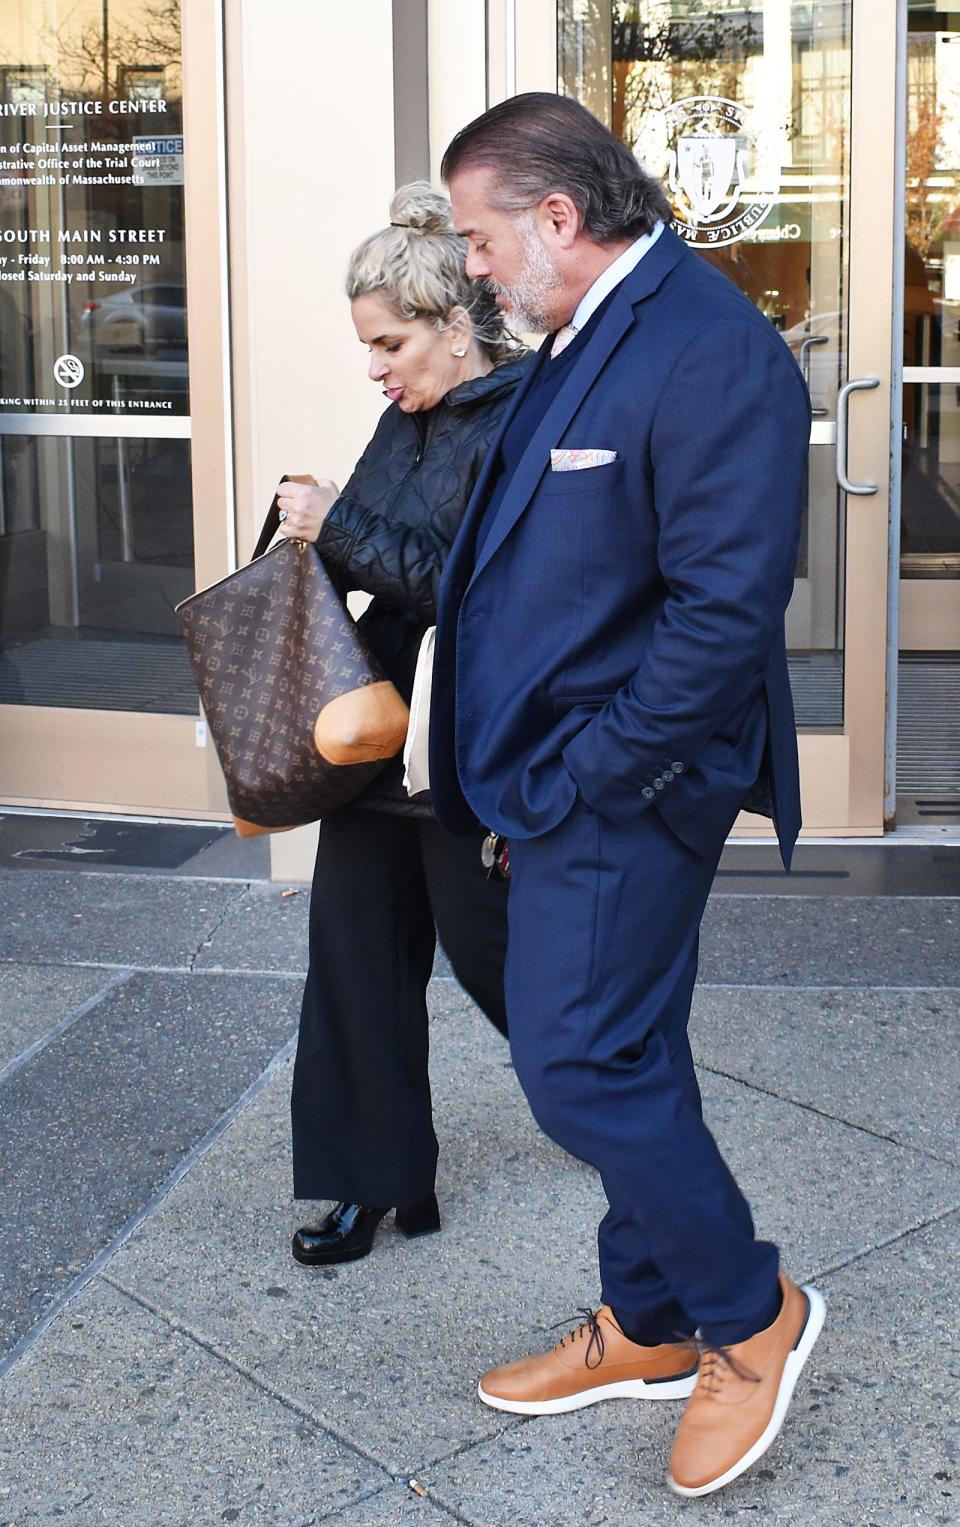 Pam Laliberte-Lebeau leaves the Justice Center with her attorney Frank Camera in this file photo.